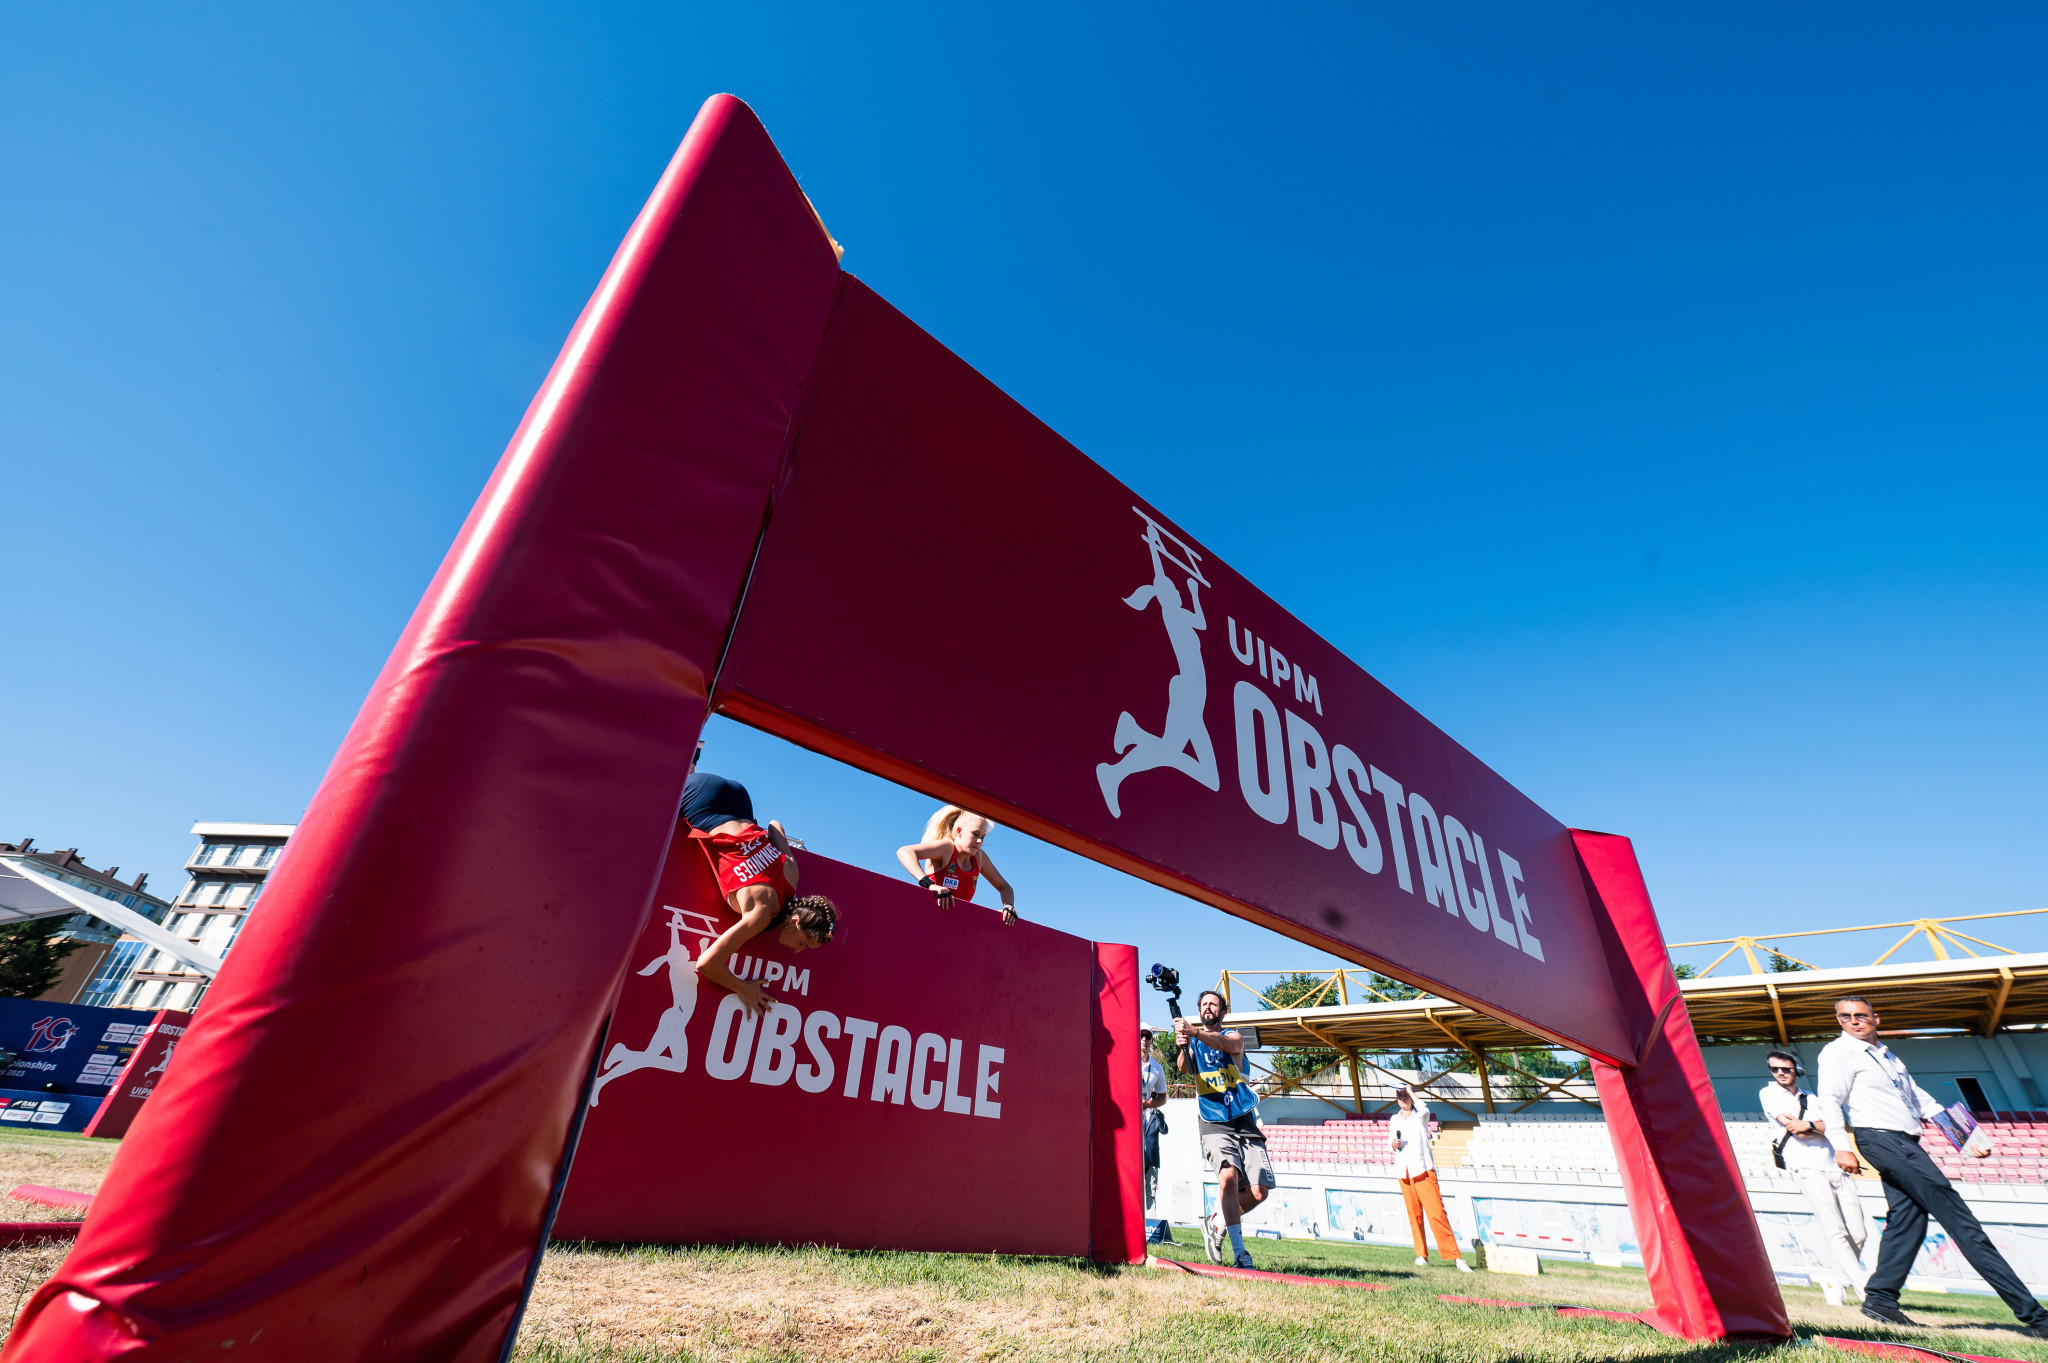 Obstacle discipline debuted at the UIPM Under-19 World Championships, with UIPM President Klaus Schormann claiming it represented a 